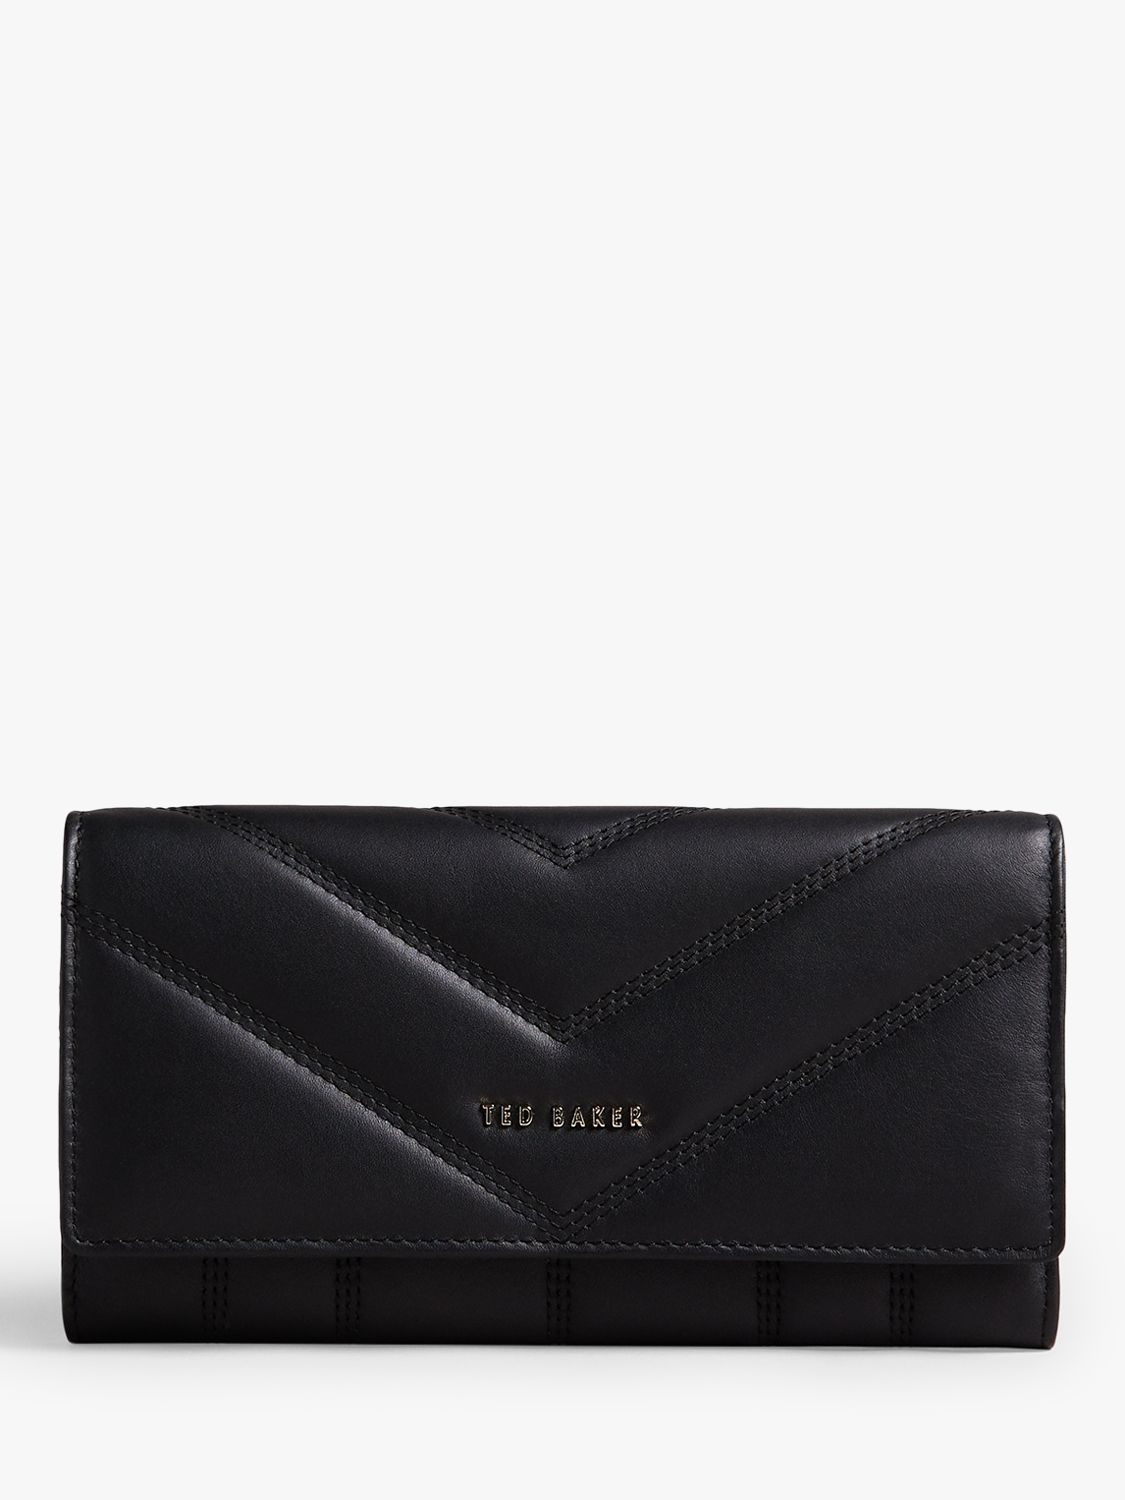 Ted Baker Ayve Large Puffer Leather Matinee Purse, Black